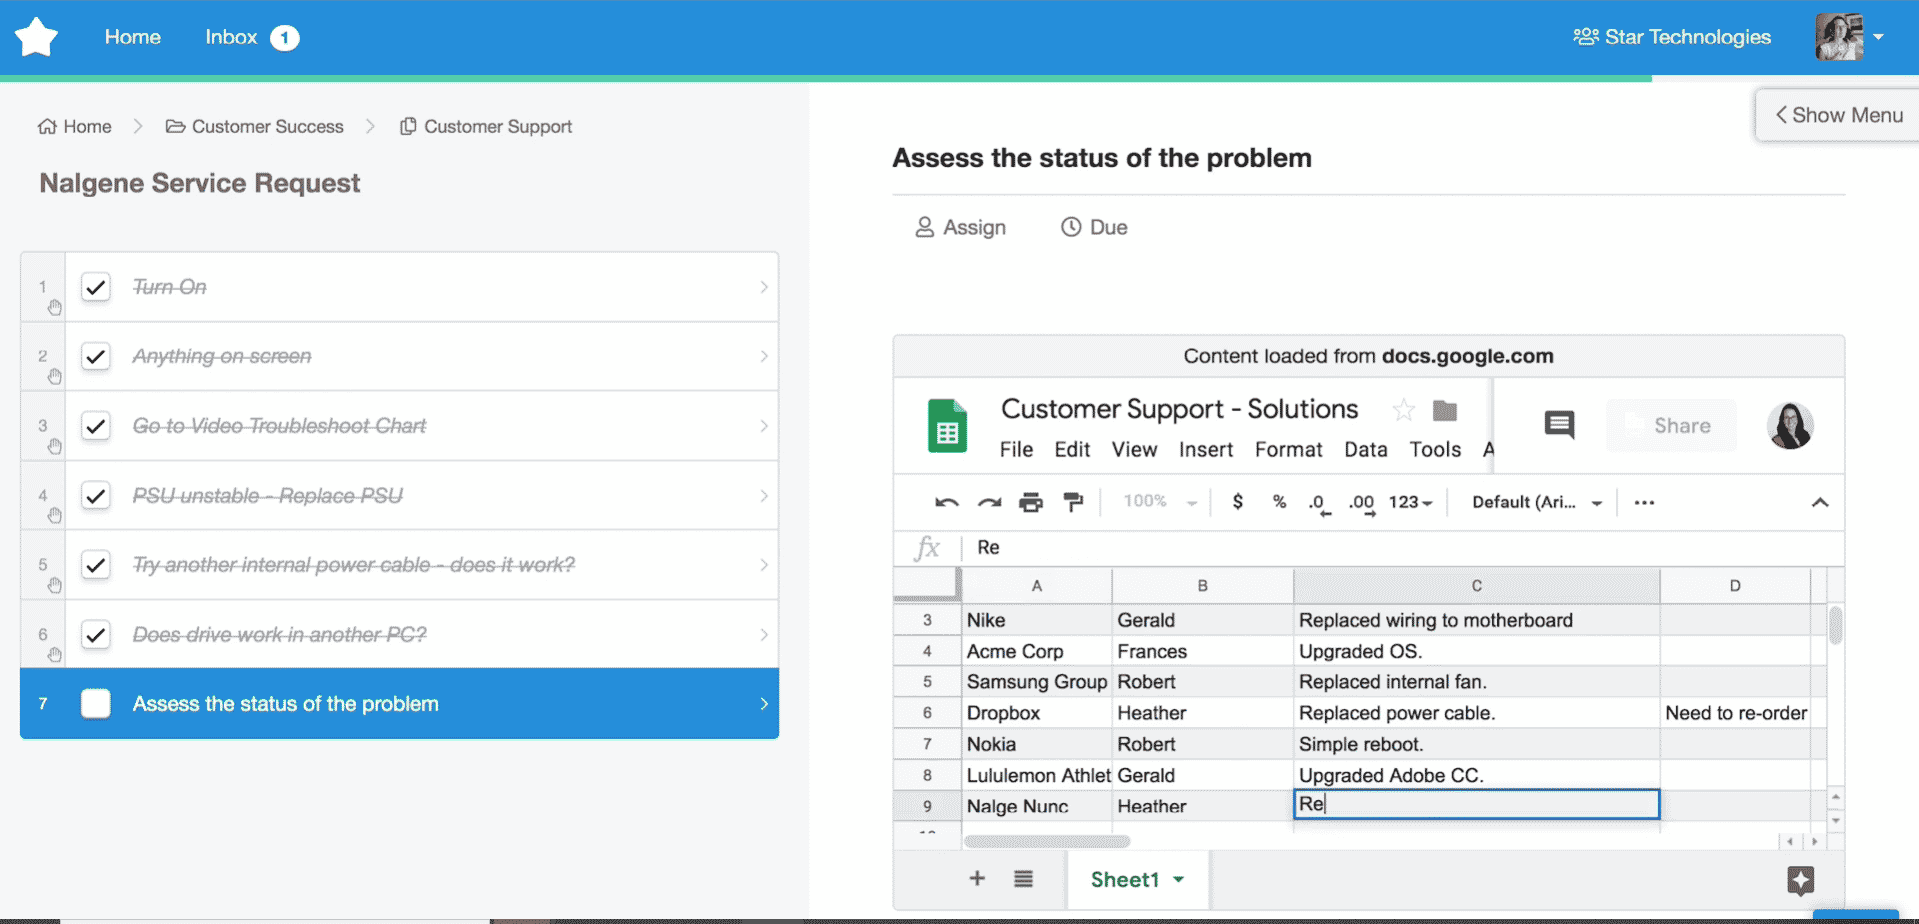 Process.st is the simplest business automation tool with a to-do list structure